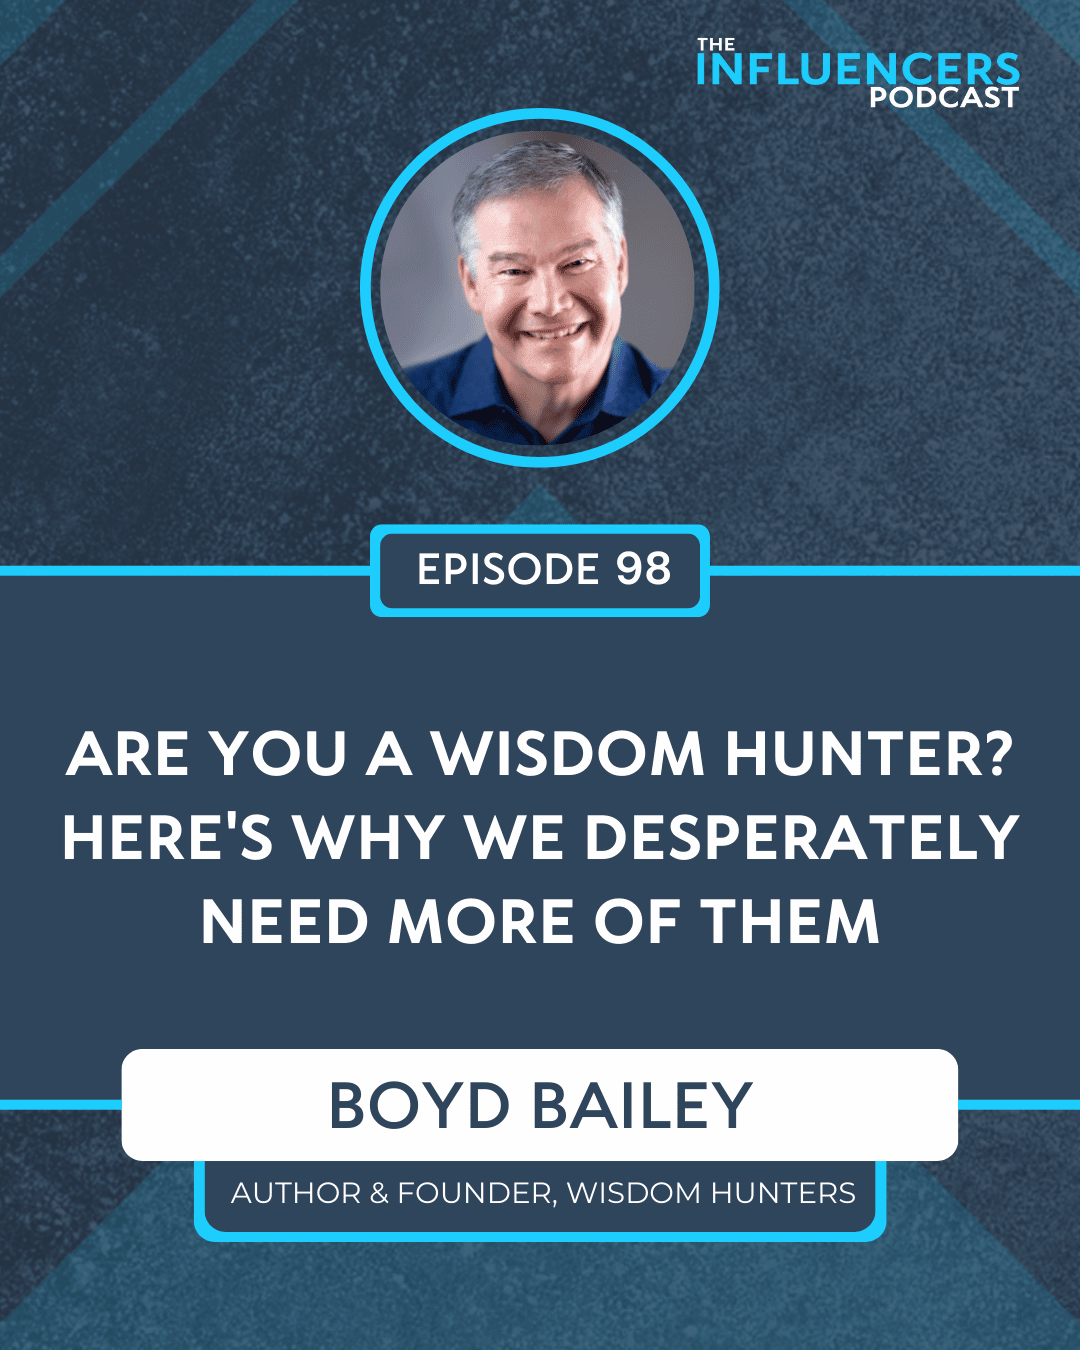 Episode 97 with Boyd Bailey.